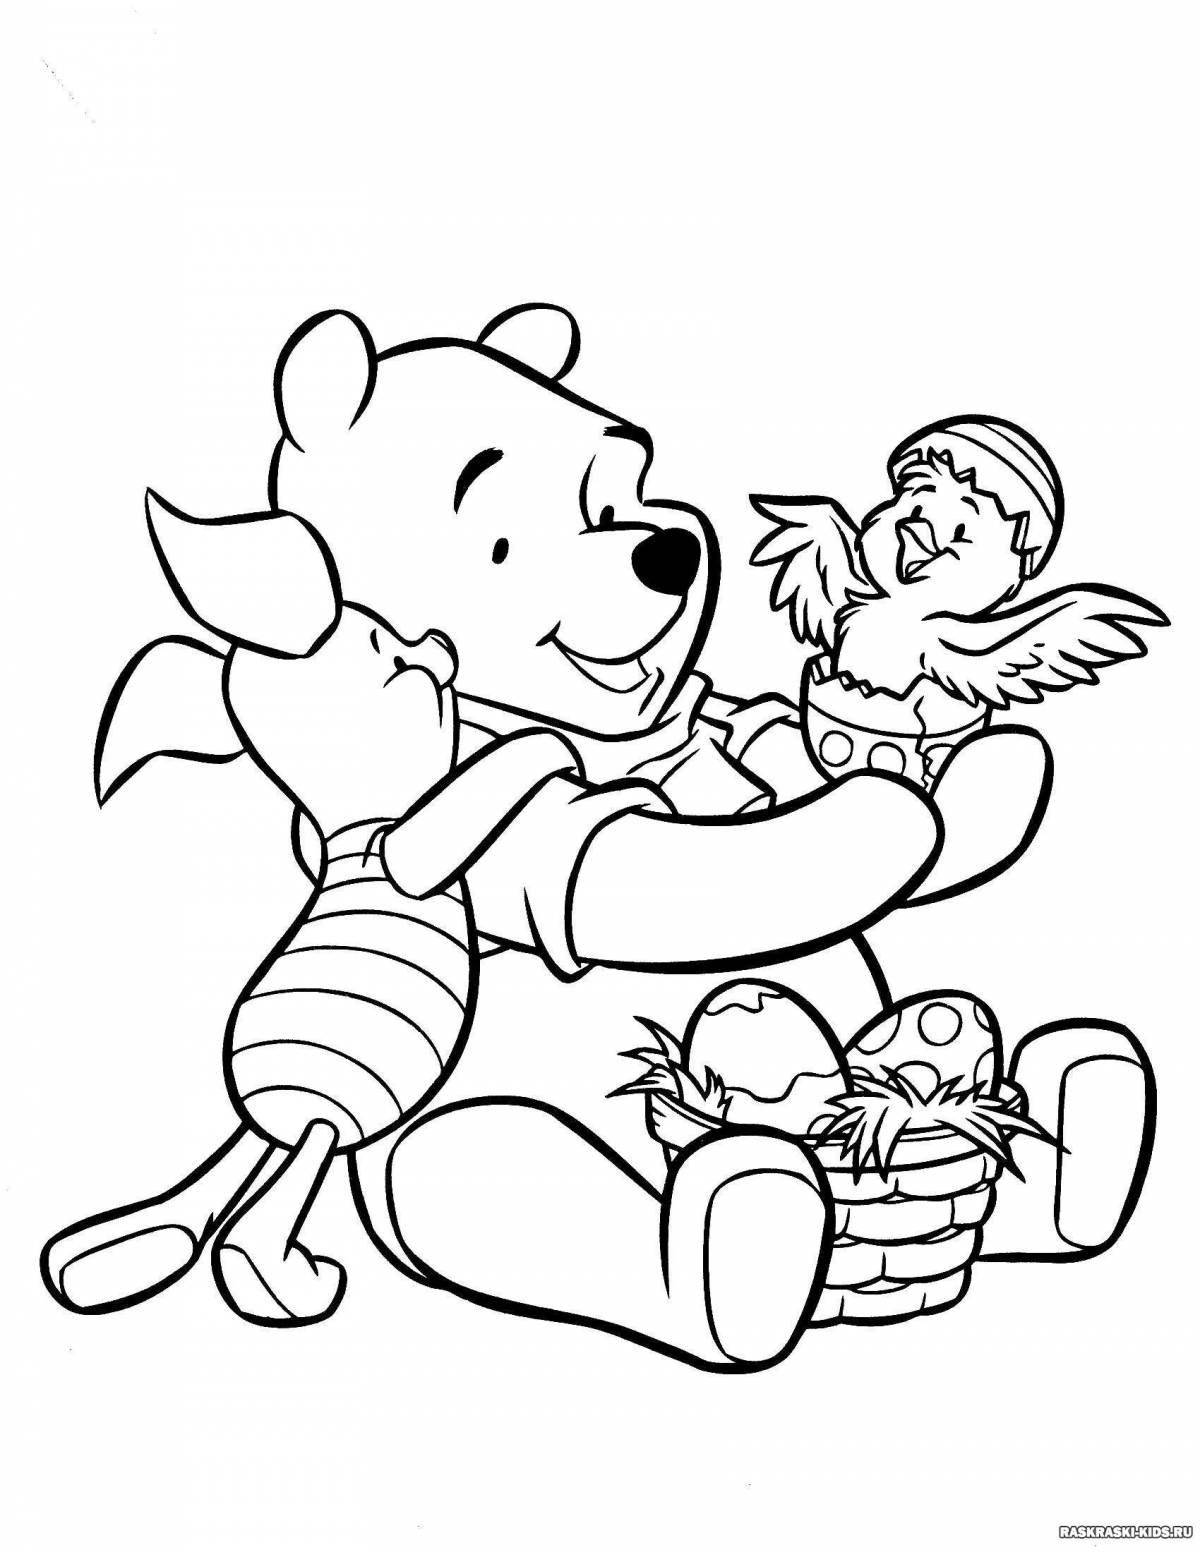 Coloring page glowing winnie the pooh and his friends